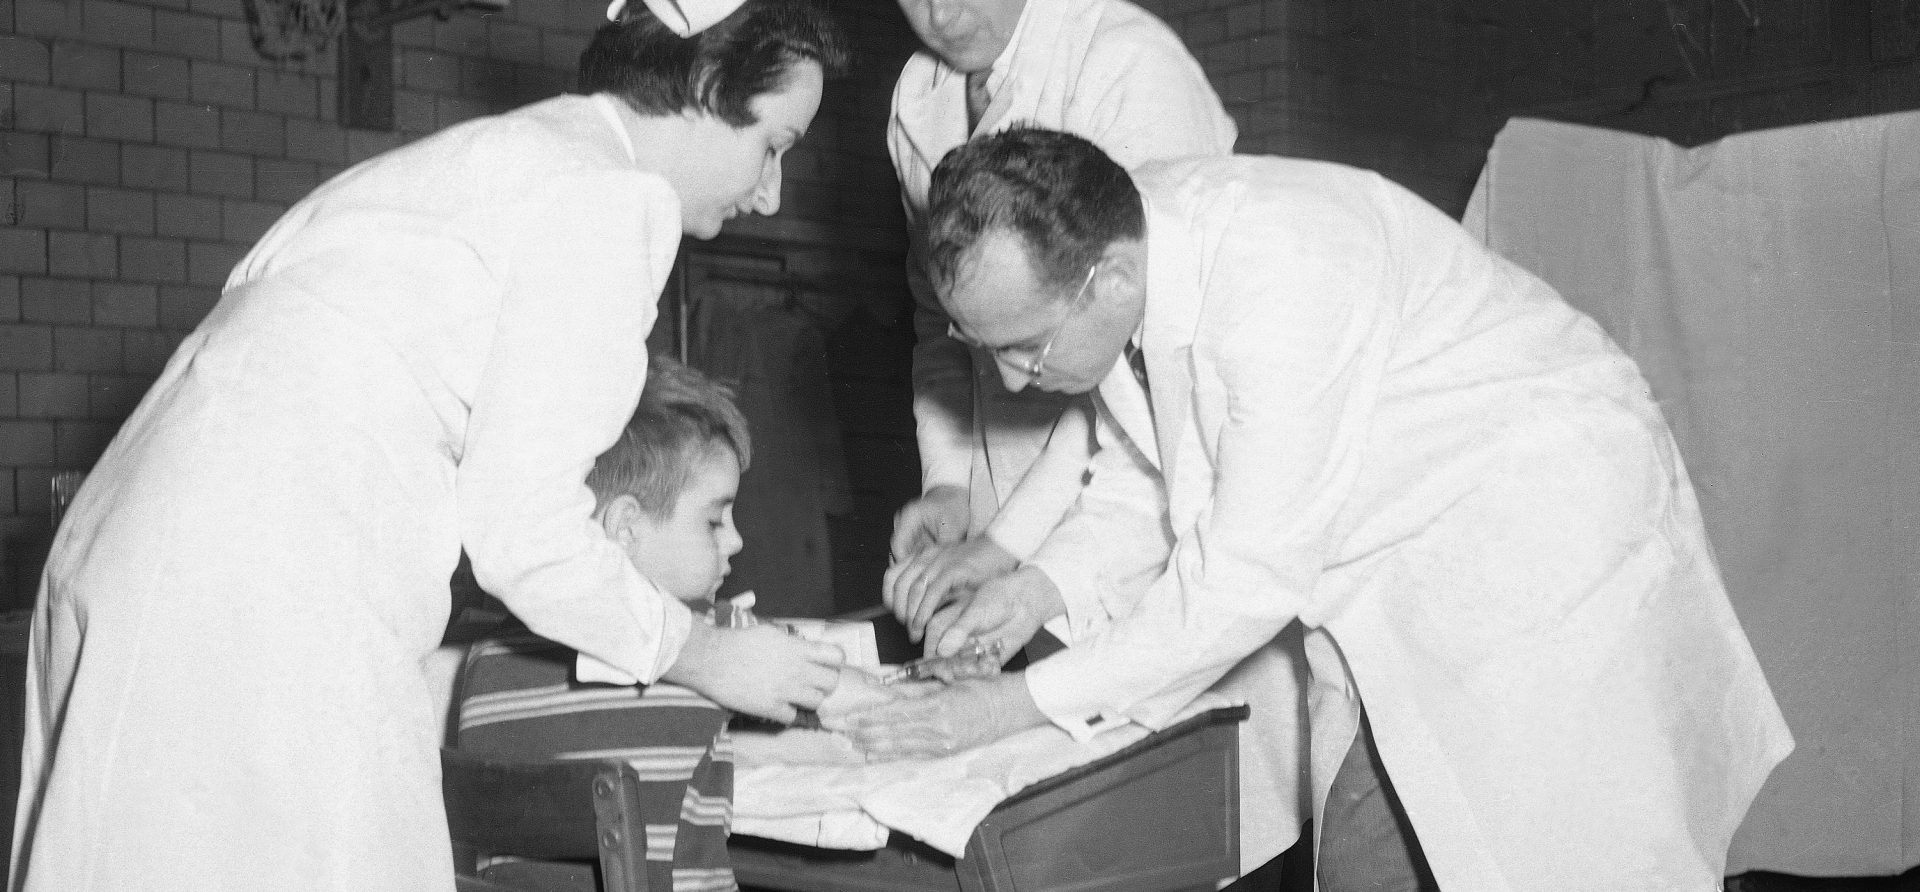 Dr. Jonas Salk, the scientist who created the polio vaccine, administers an injection to an unidentified boy at Arsenal Elementary School in Pittsburgh, Pa., in 1954.